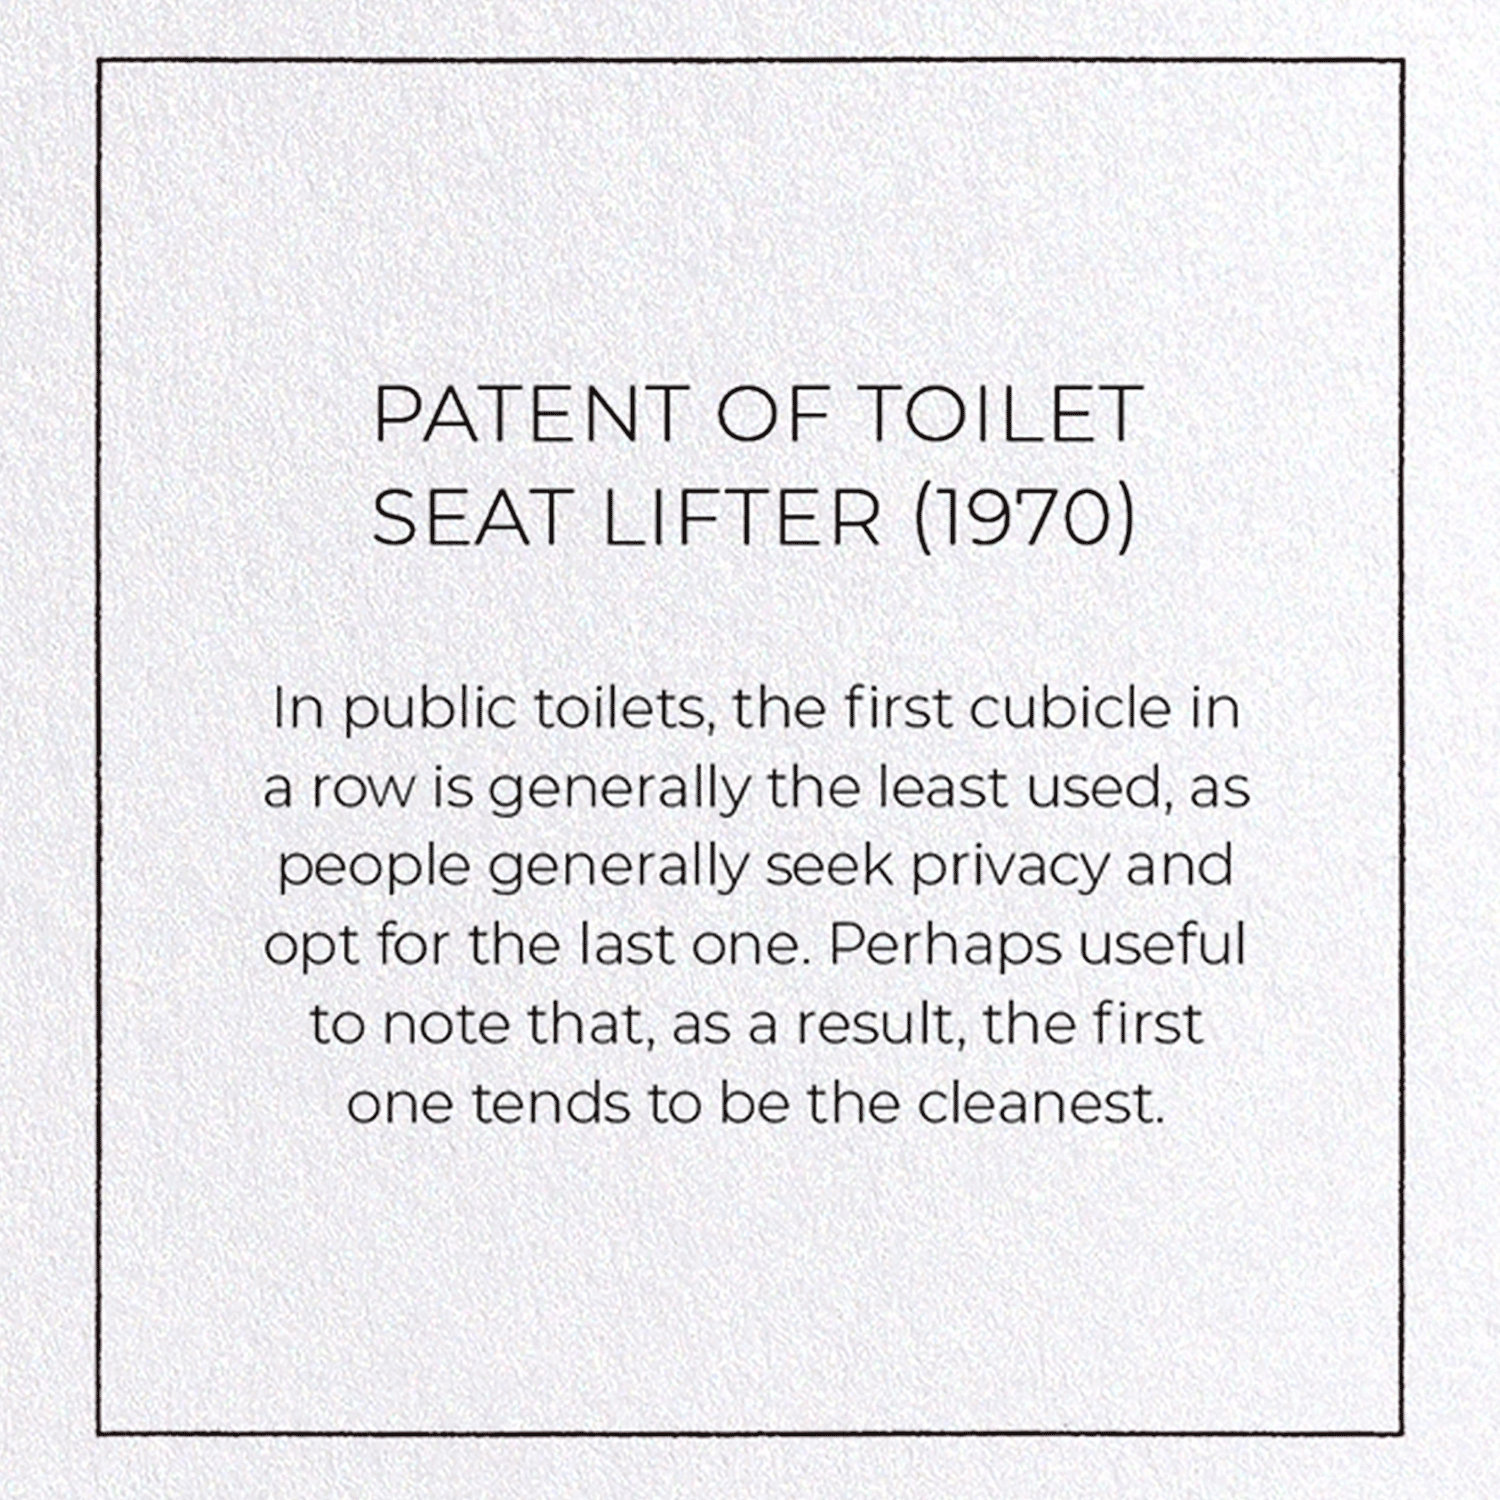 PATENT OF TOILET SEAT LIFTER (1970): Patent Greeting Card